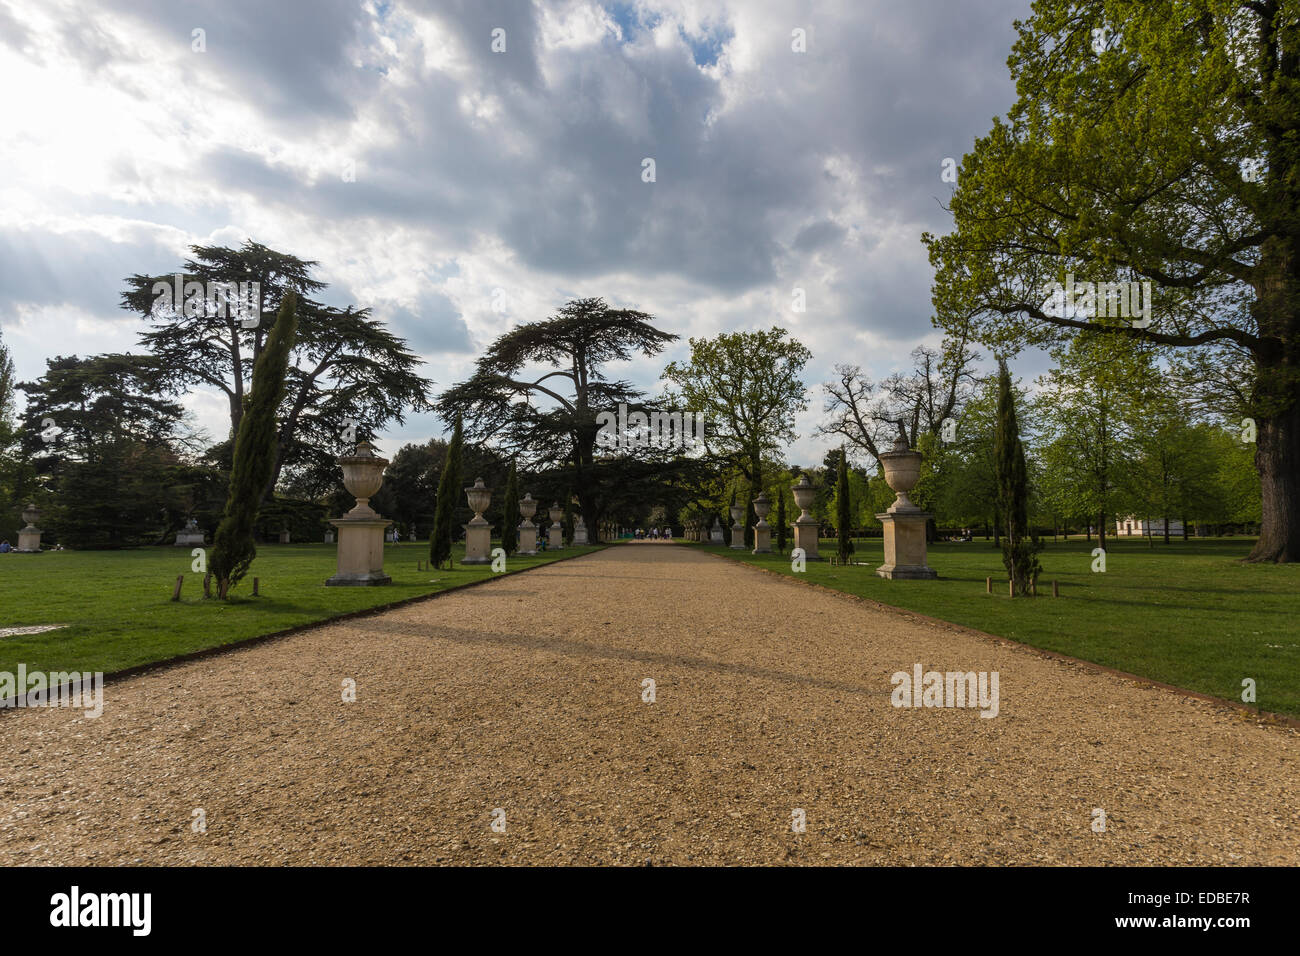 Jardins de Chiswick, Chiswick, London, Greater London, Angleterre, Royaume-Uni Banque D'Images